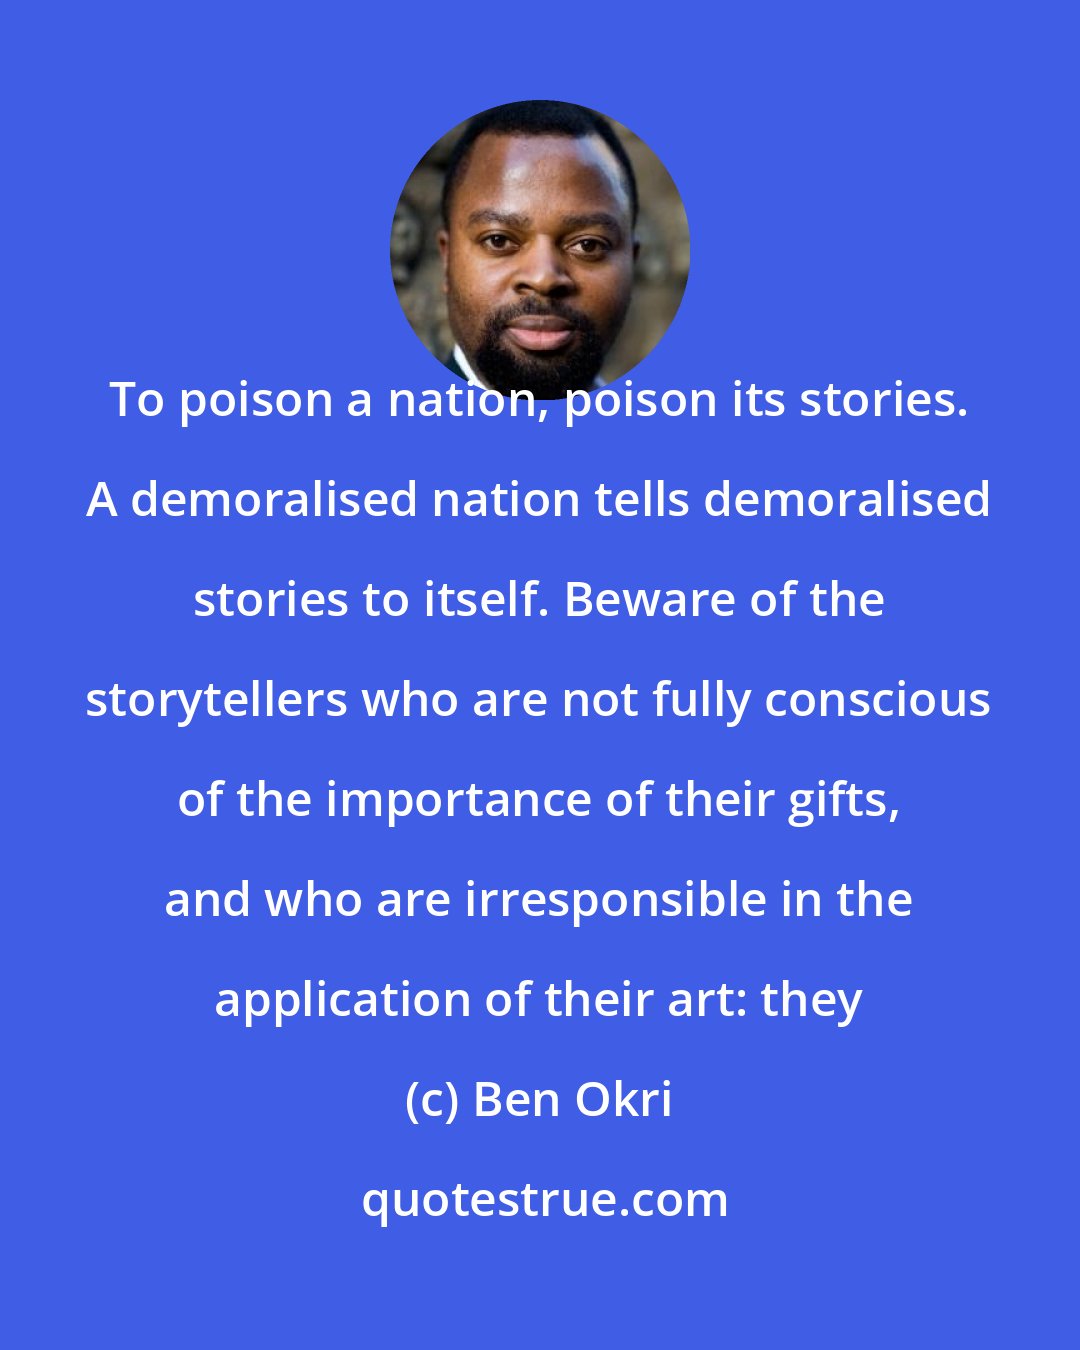 Ben Okri: To poison a nation, poison its stories. A demoralised nation tells demoralised stories to itself. Beware of the storytellers who are not fully conscious of the importance of their gifts, and who are irresponsible in the application of their art: they